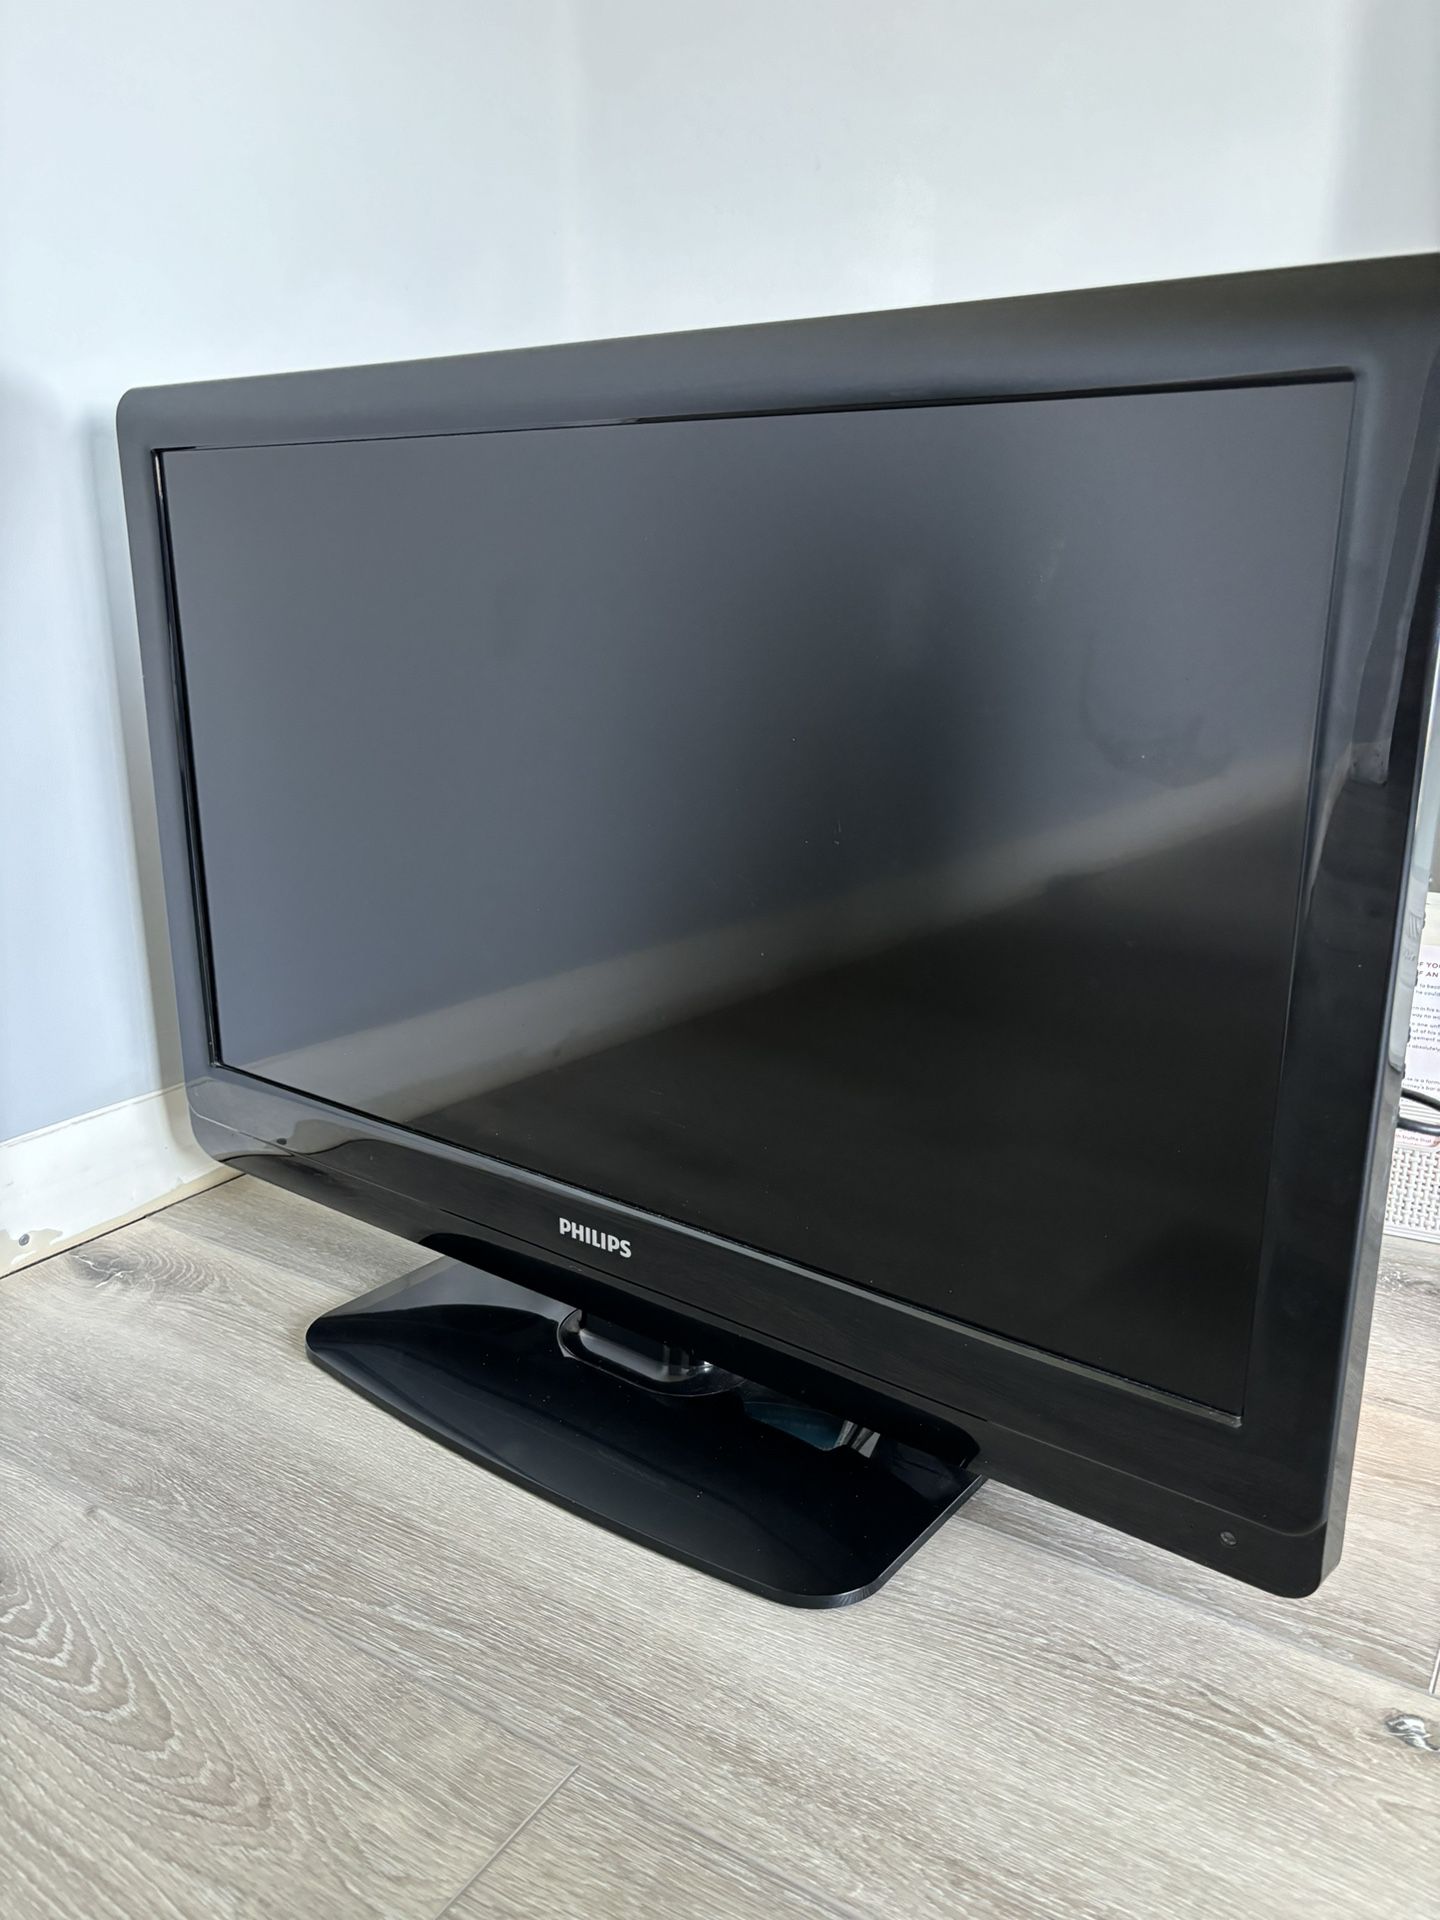 32 Inch Tv Or Monitor 